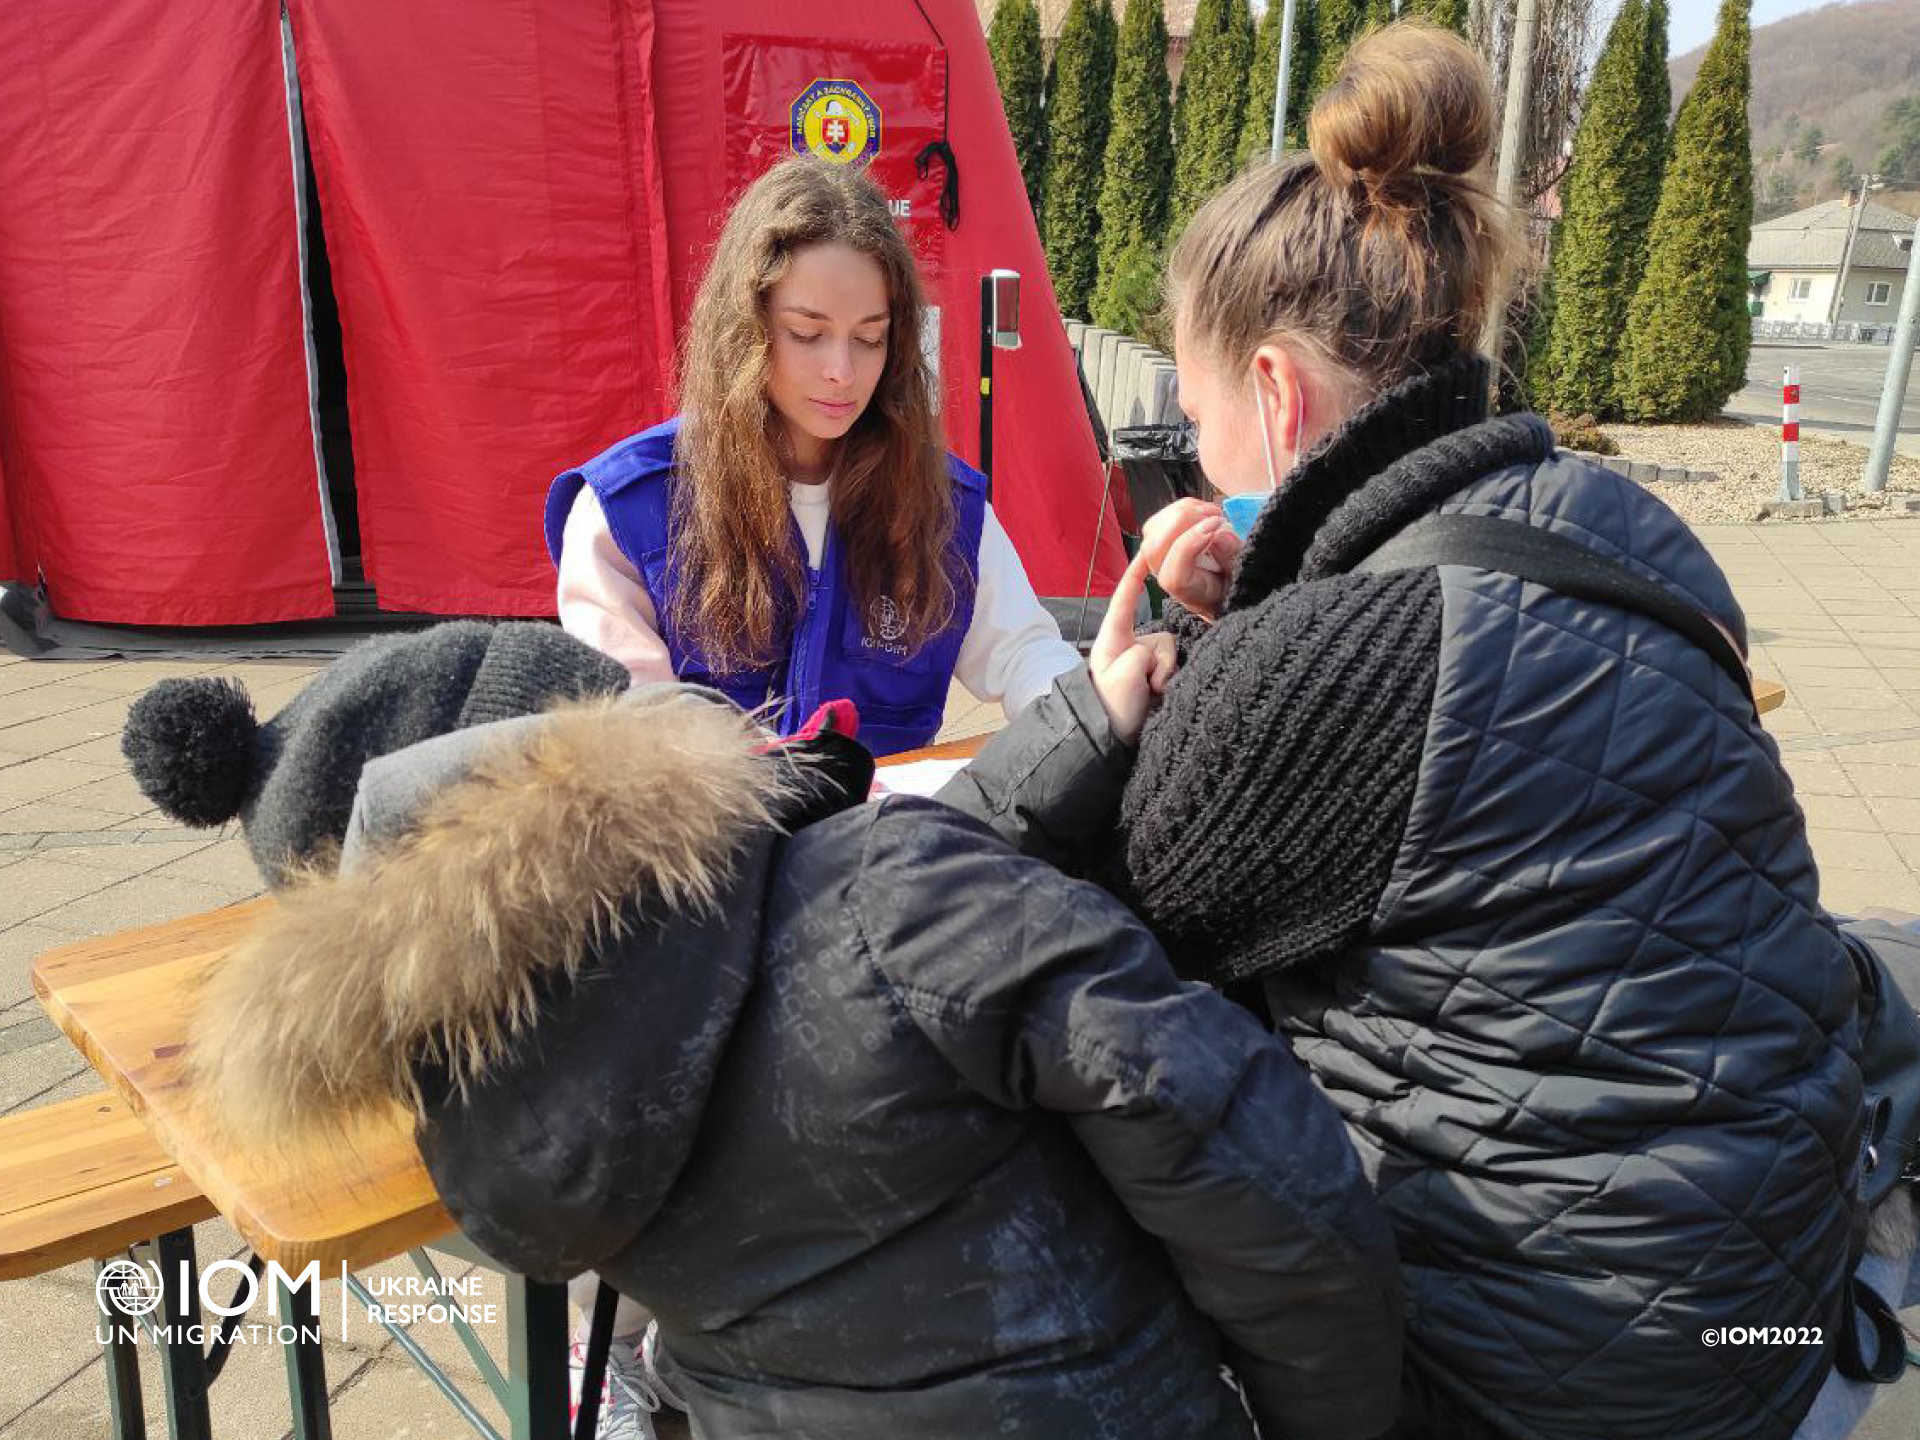 IOM’s displacement tracking matrix (DTM) team in Slovakia collects data for multisectoral needs assessments and intention surveys in the country. Photo © IOM 2022.